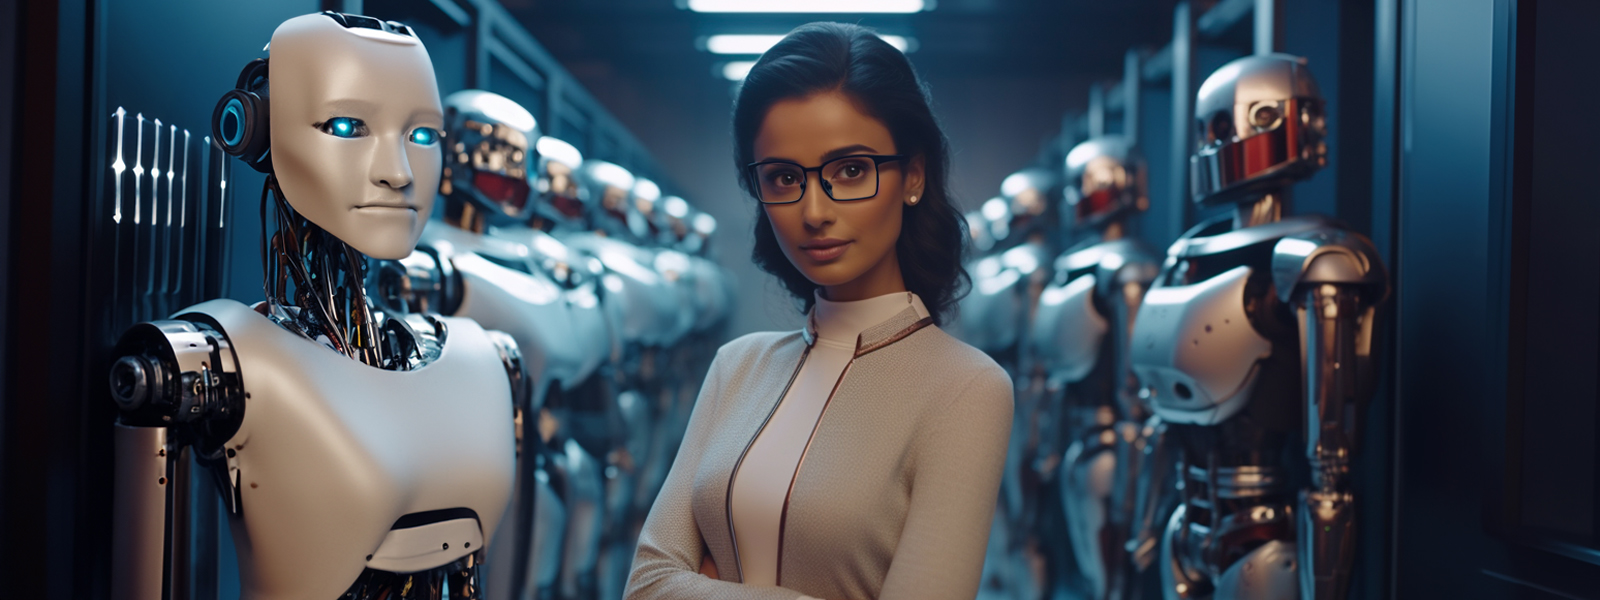 A woman in glasses standing next to a line of humanoid robots, representing advancements in robotics and AI.